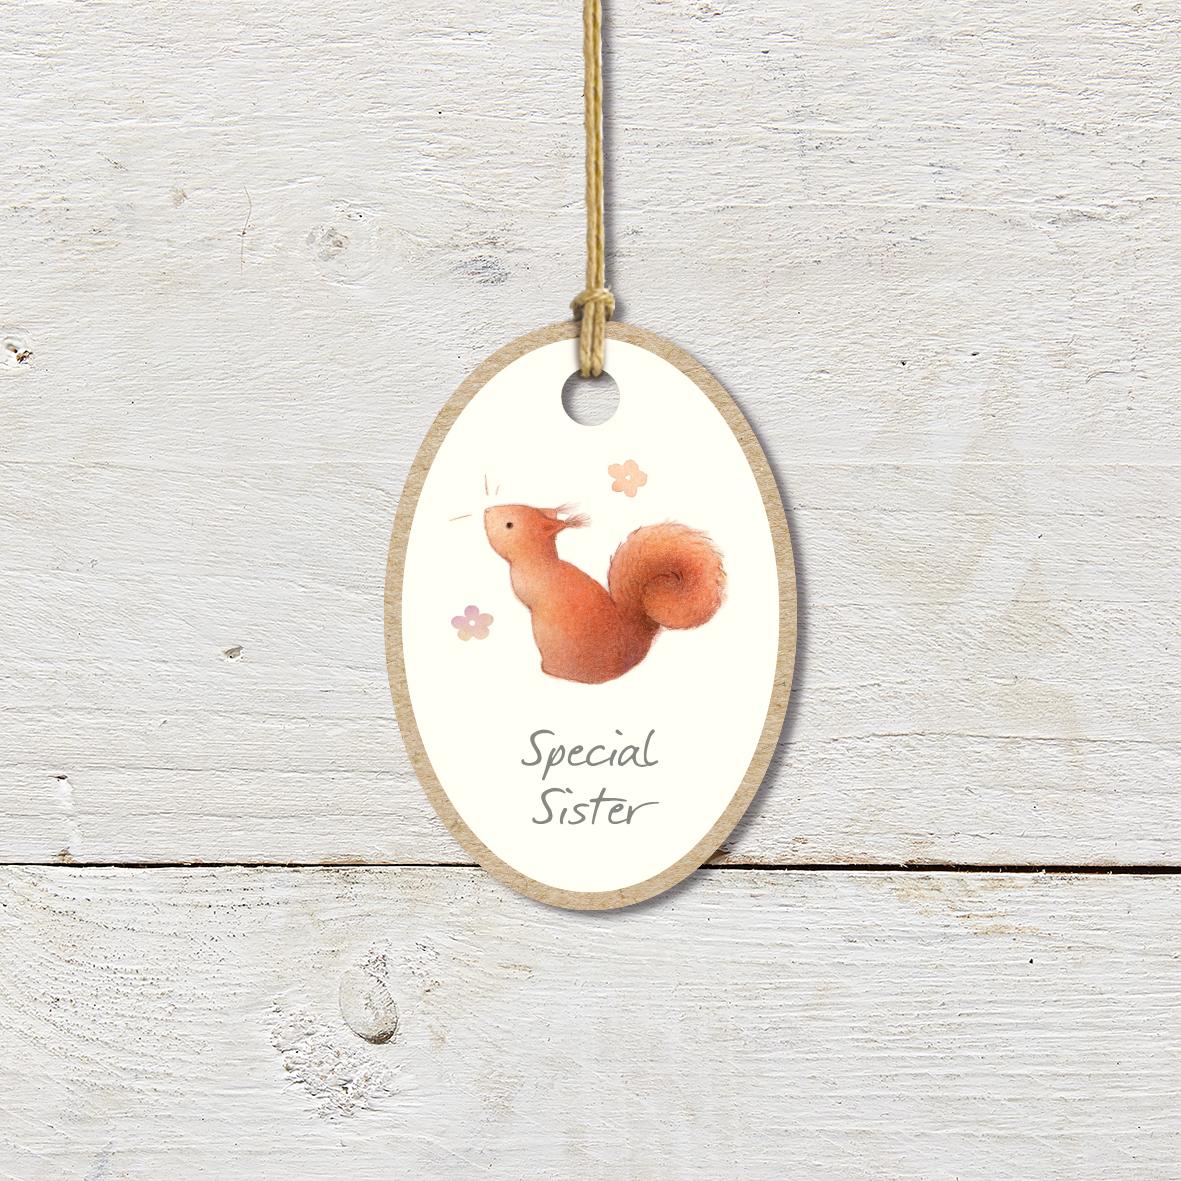 Small Wooden Keepsake Plaque/Tag featuring a cute red squirrel with a ’Special Sister’ caption.